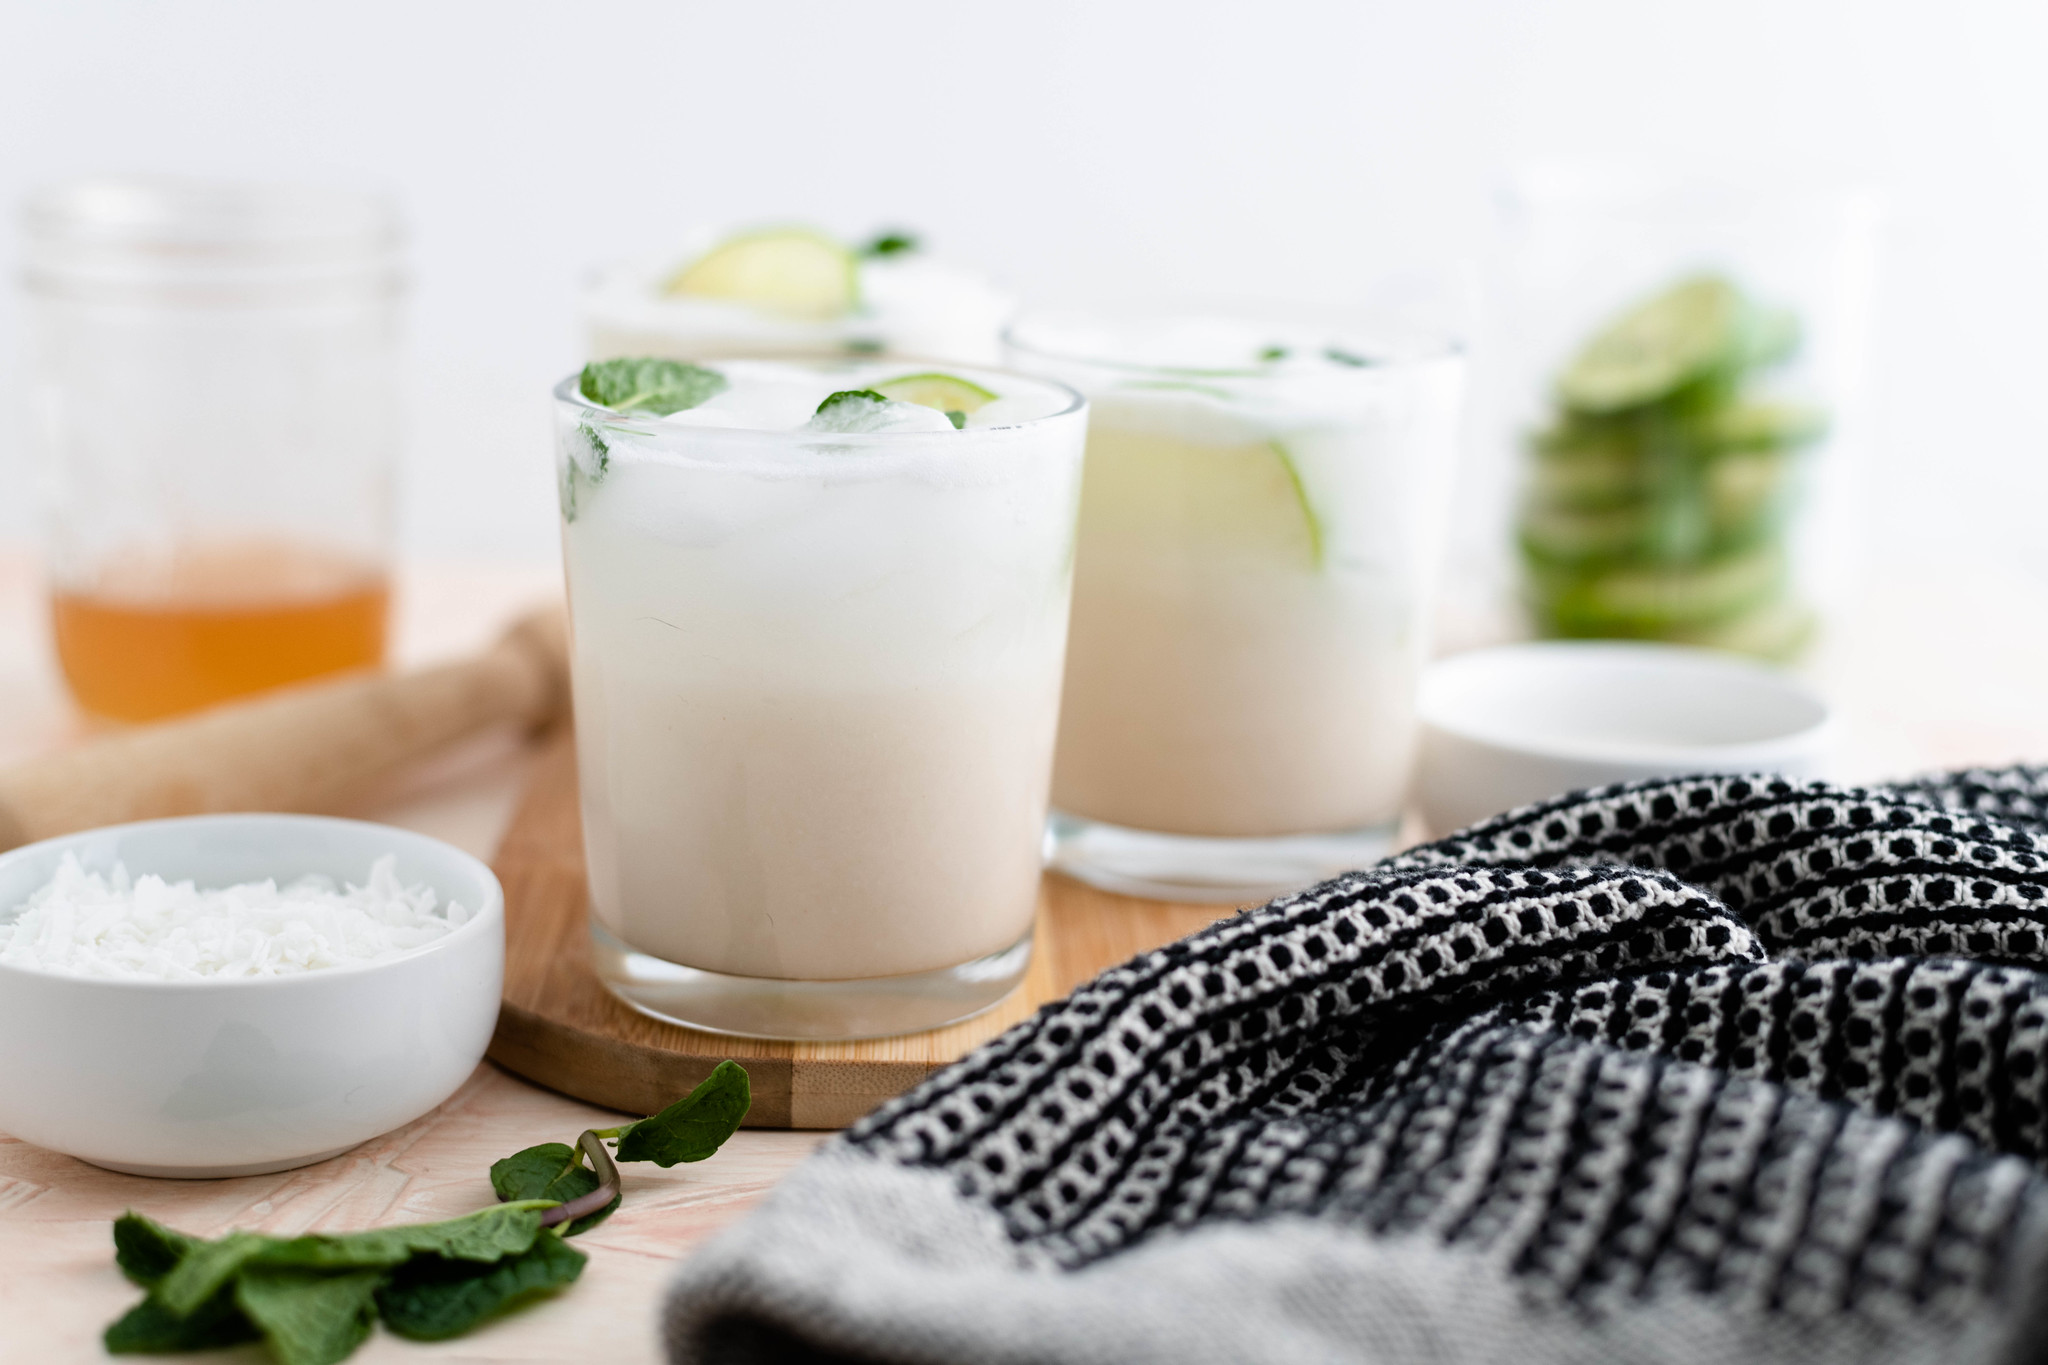 Mix up a few Coconut Mojitos for the ultimate tropical vibes at home. Packed full of sweet coconut flavor, this drink will quickly become a summertime favorite.